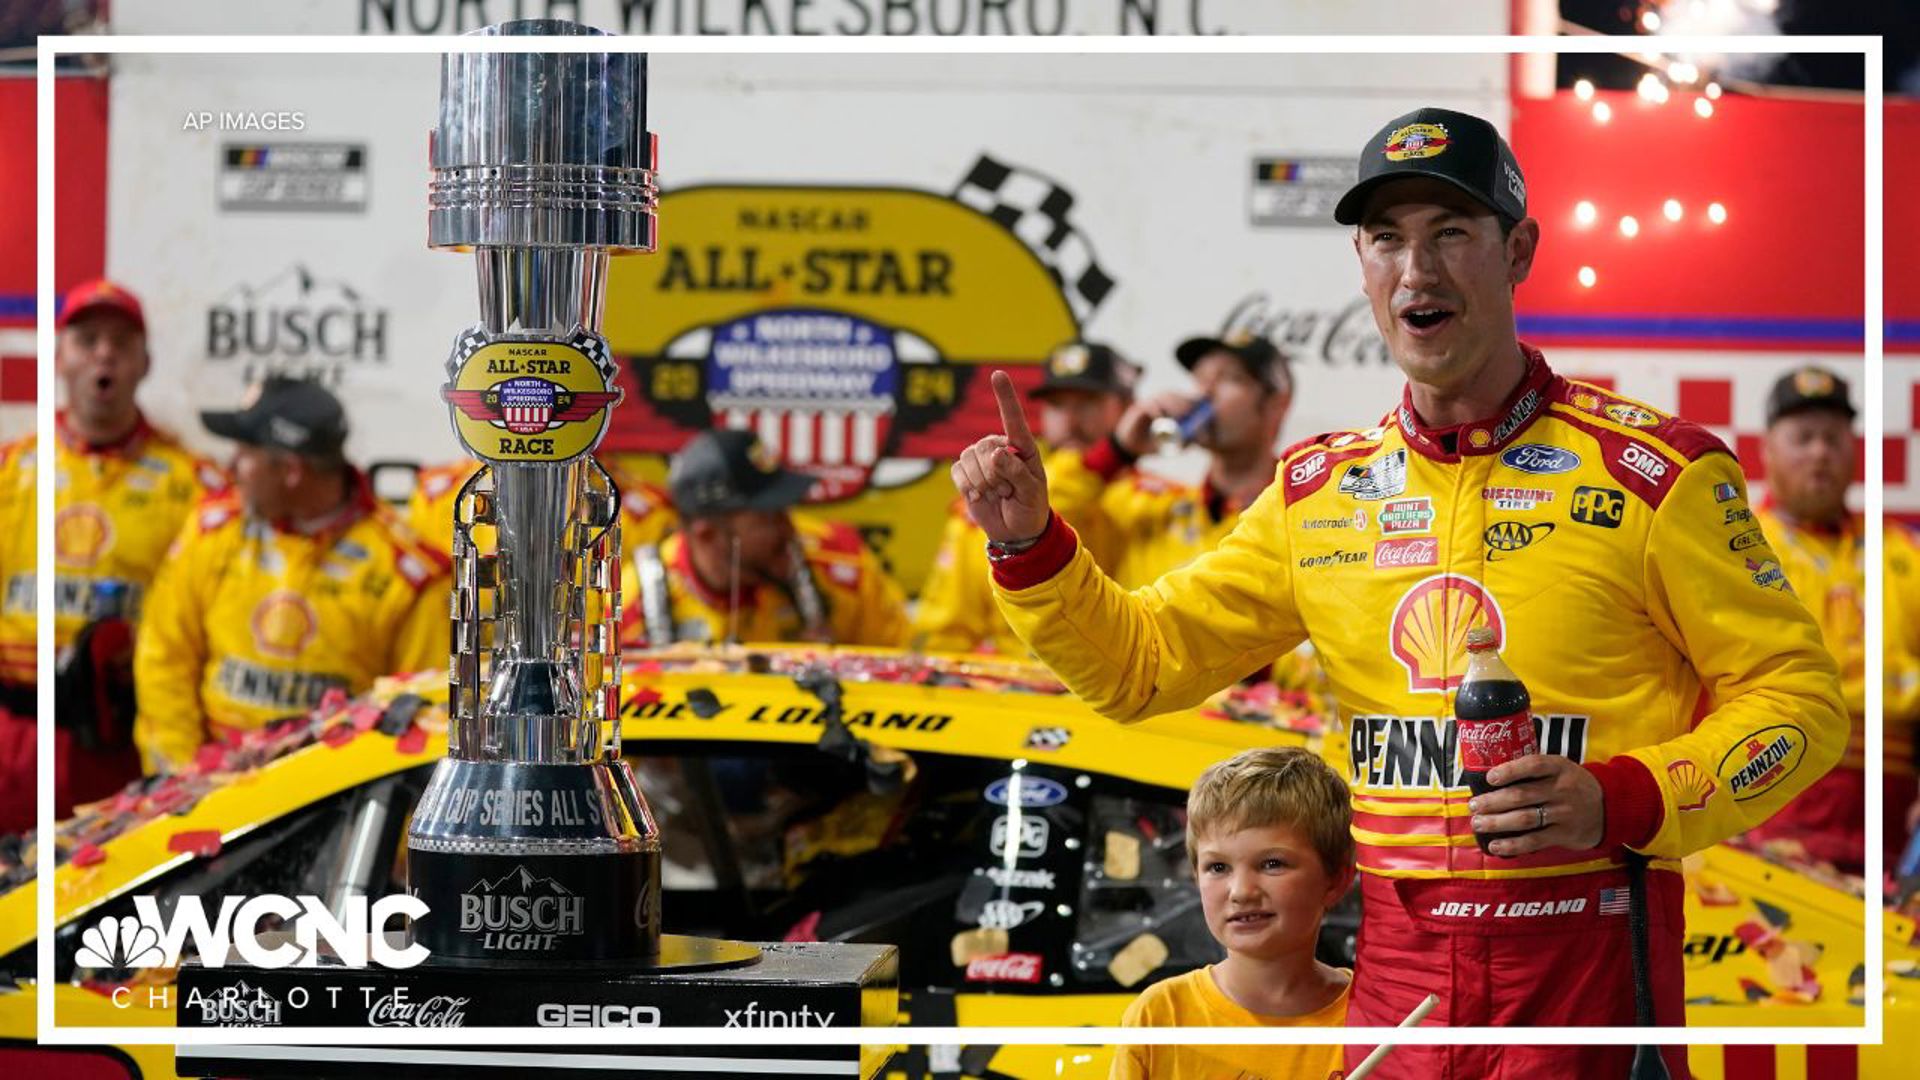 Joey Logano dominated at North Wilkesboro but it was a post-race brawl involving Ricky Stenhouse Jr. and Kyle Busch that has everyone talking.